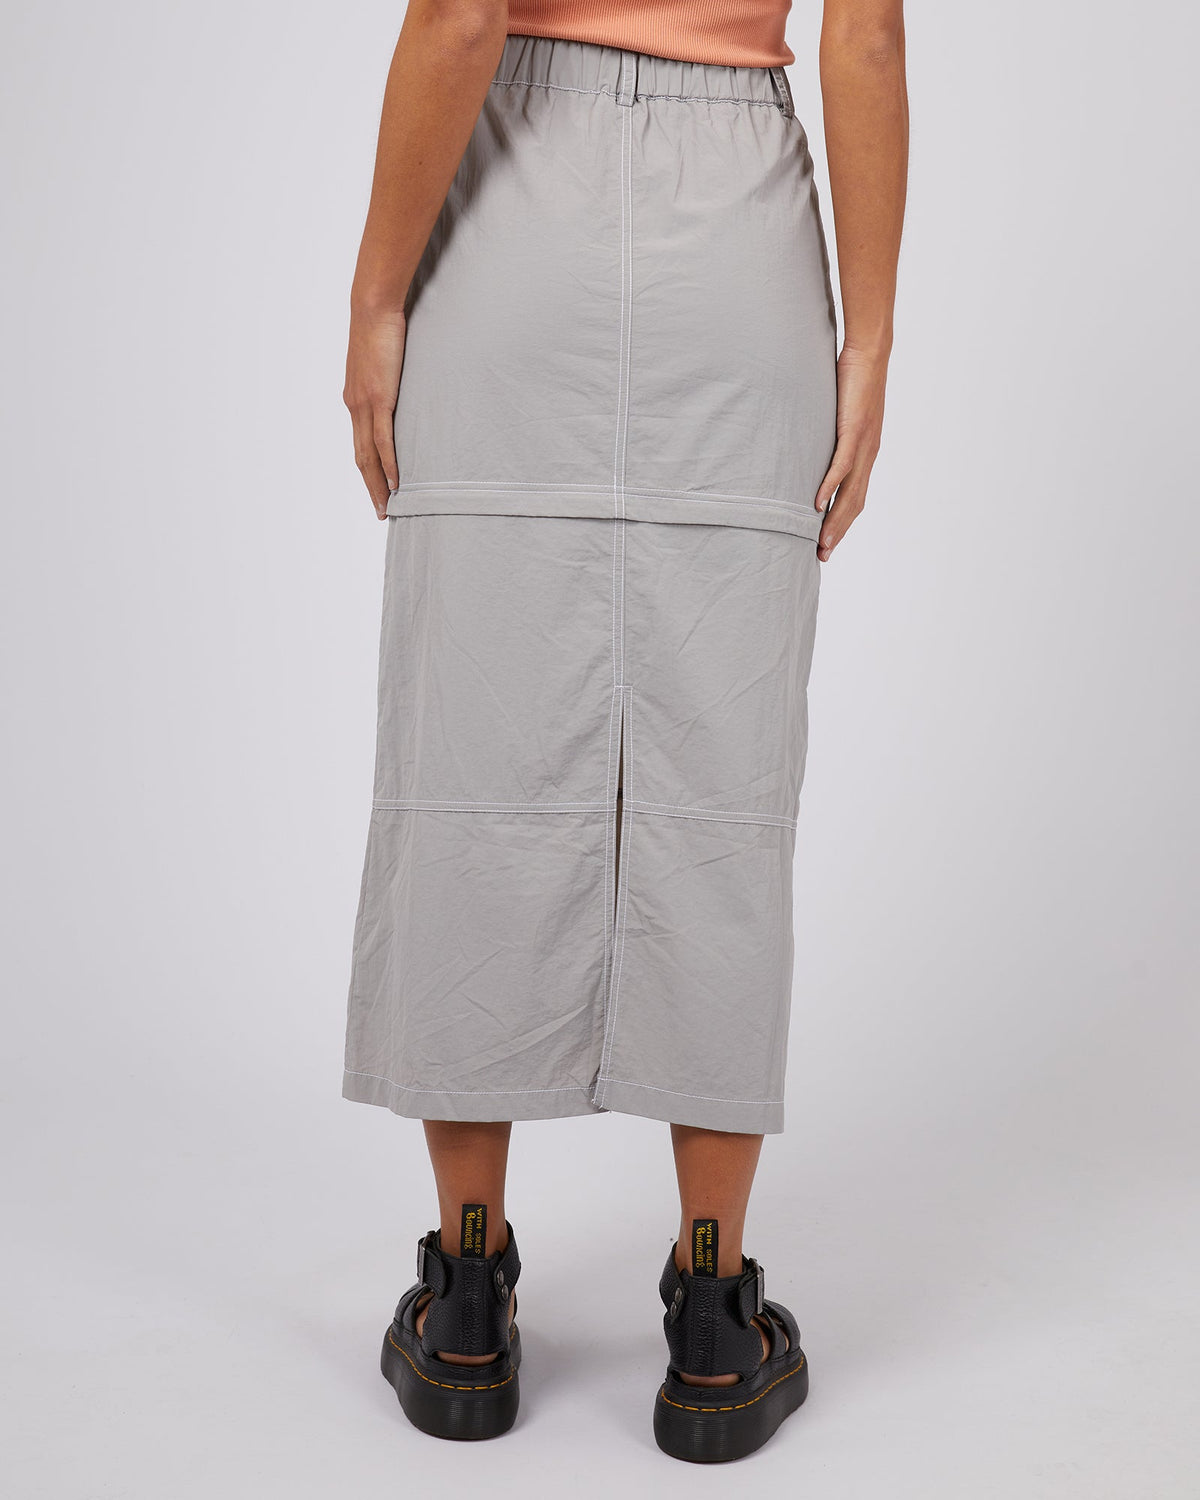 Silent Theory Ladies-Ace Contrast Skirt Grey-Edge Clothing